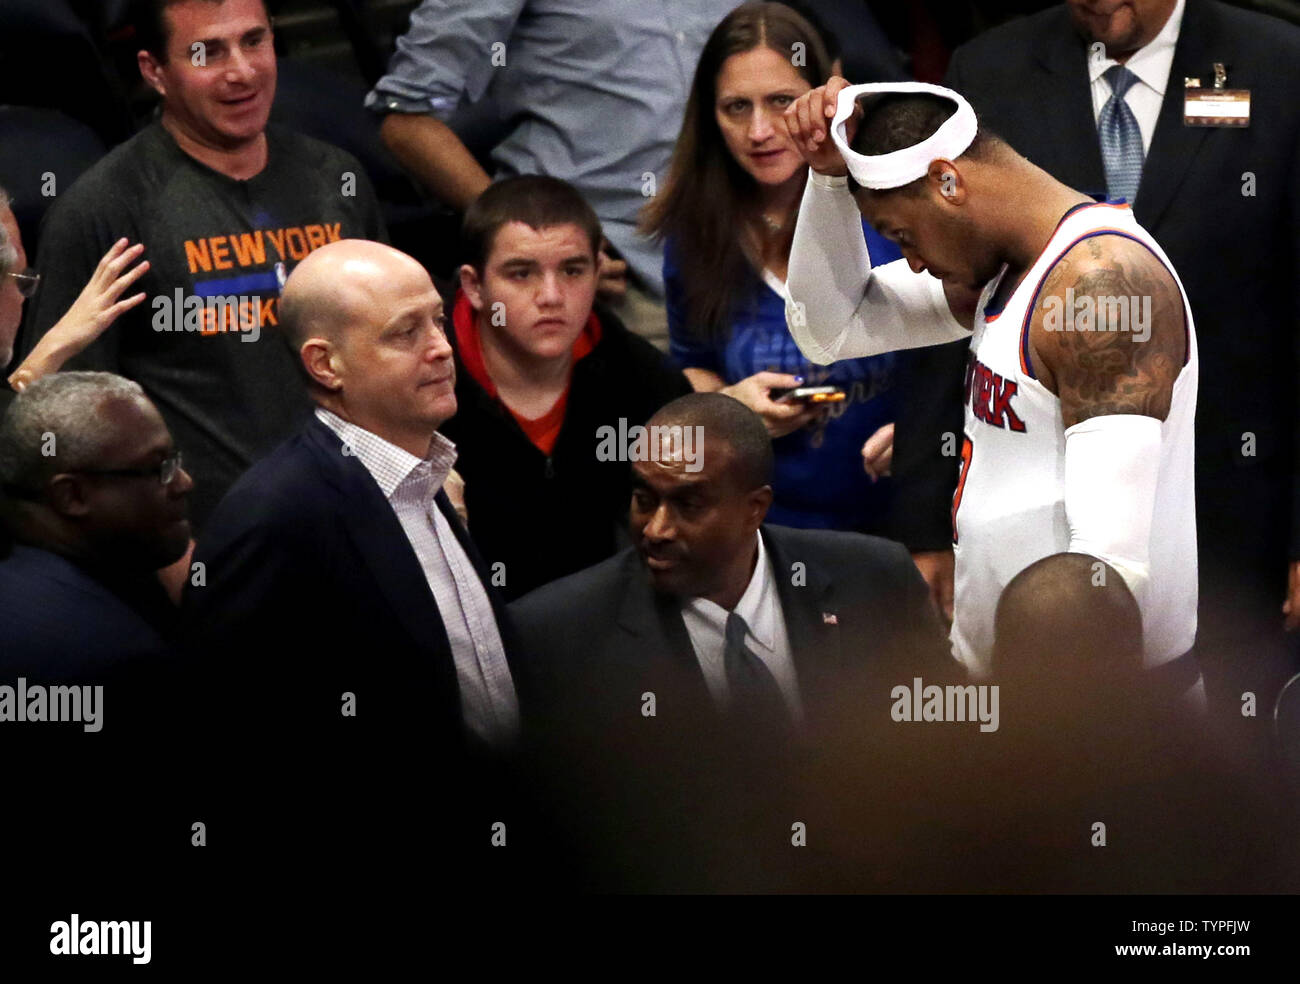 Video: Kid runs on to court during game to hug Knicks' Carmelo Anthony –  New York Daily News